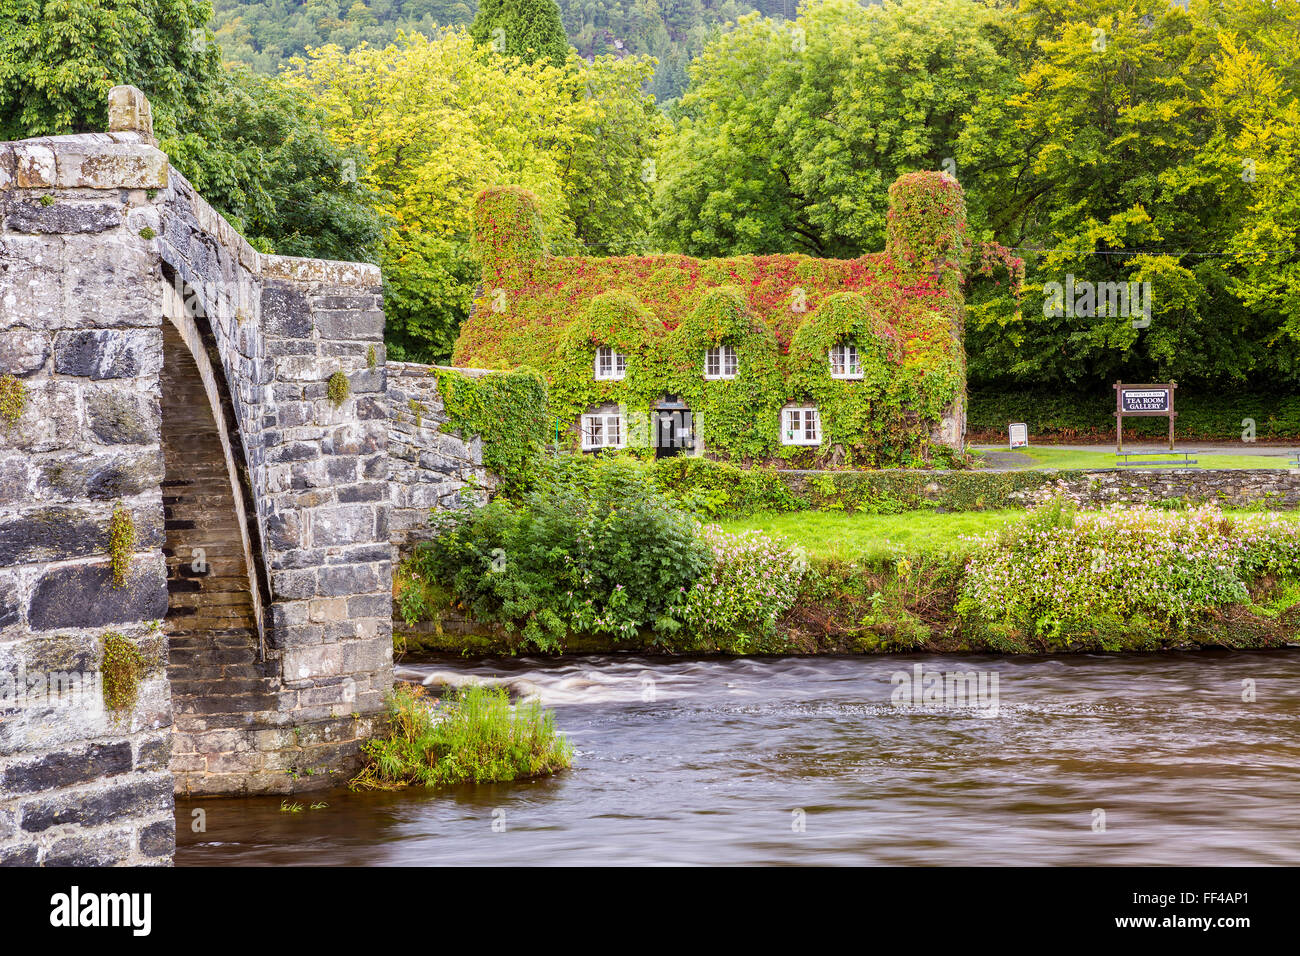 17th century stone bridge over the River Conwy at Llanrwst, with the ivy-clad Tu Hwnt i'r Bont National Trust tearooms on the we Stock Photo